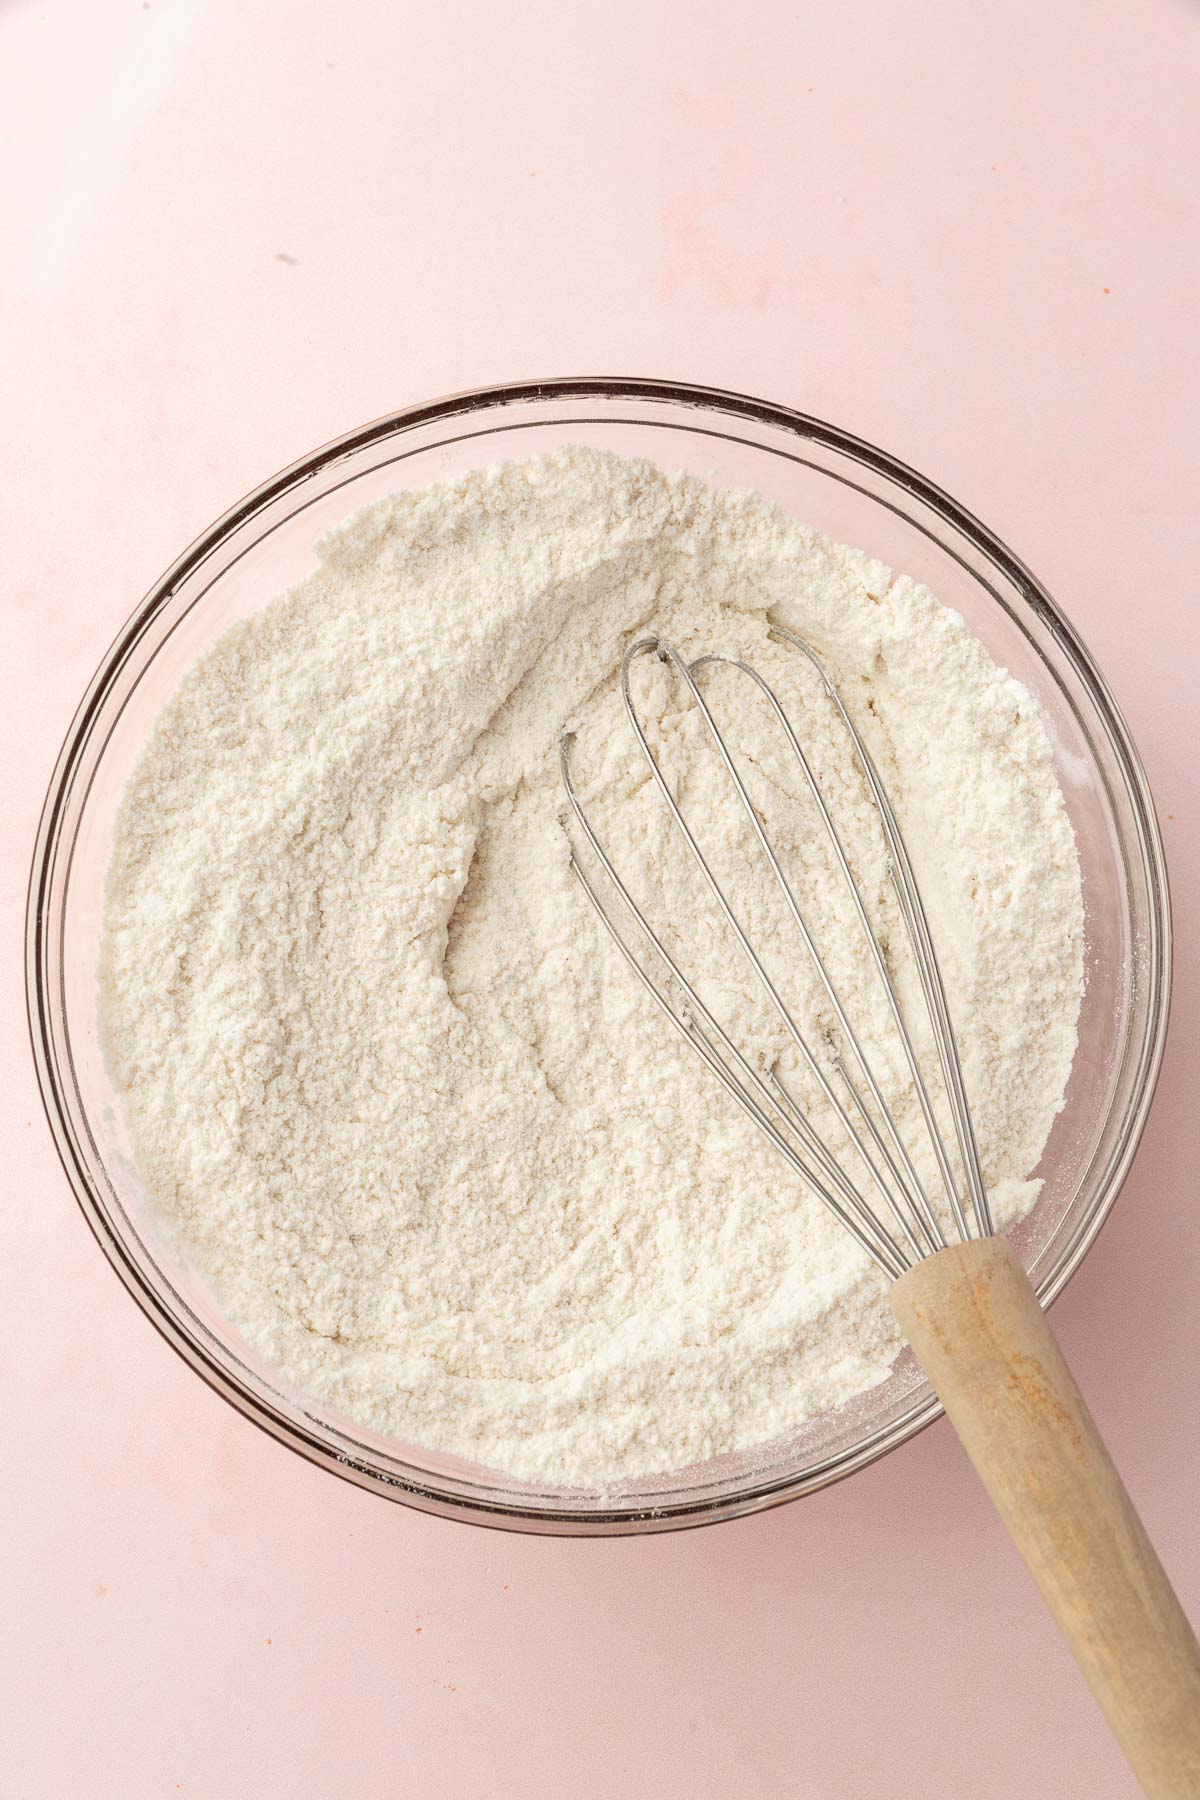 A glass mixing bowl of gluten-free flour blend with a whisk.